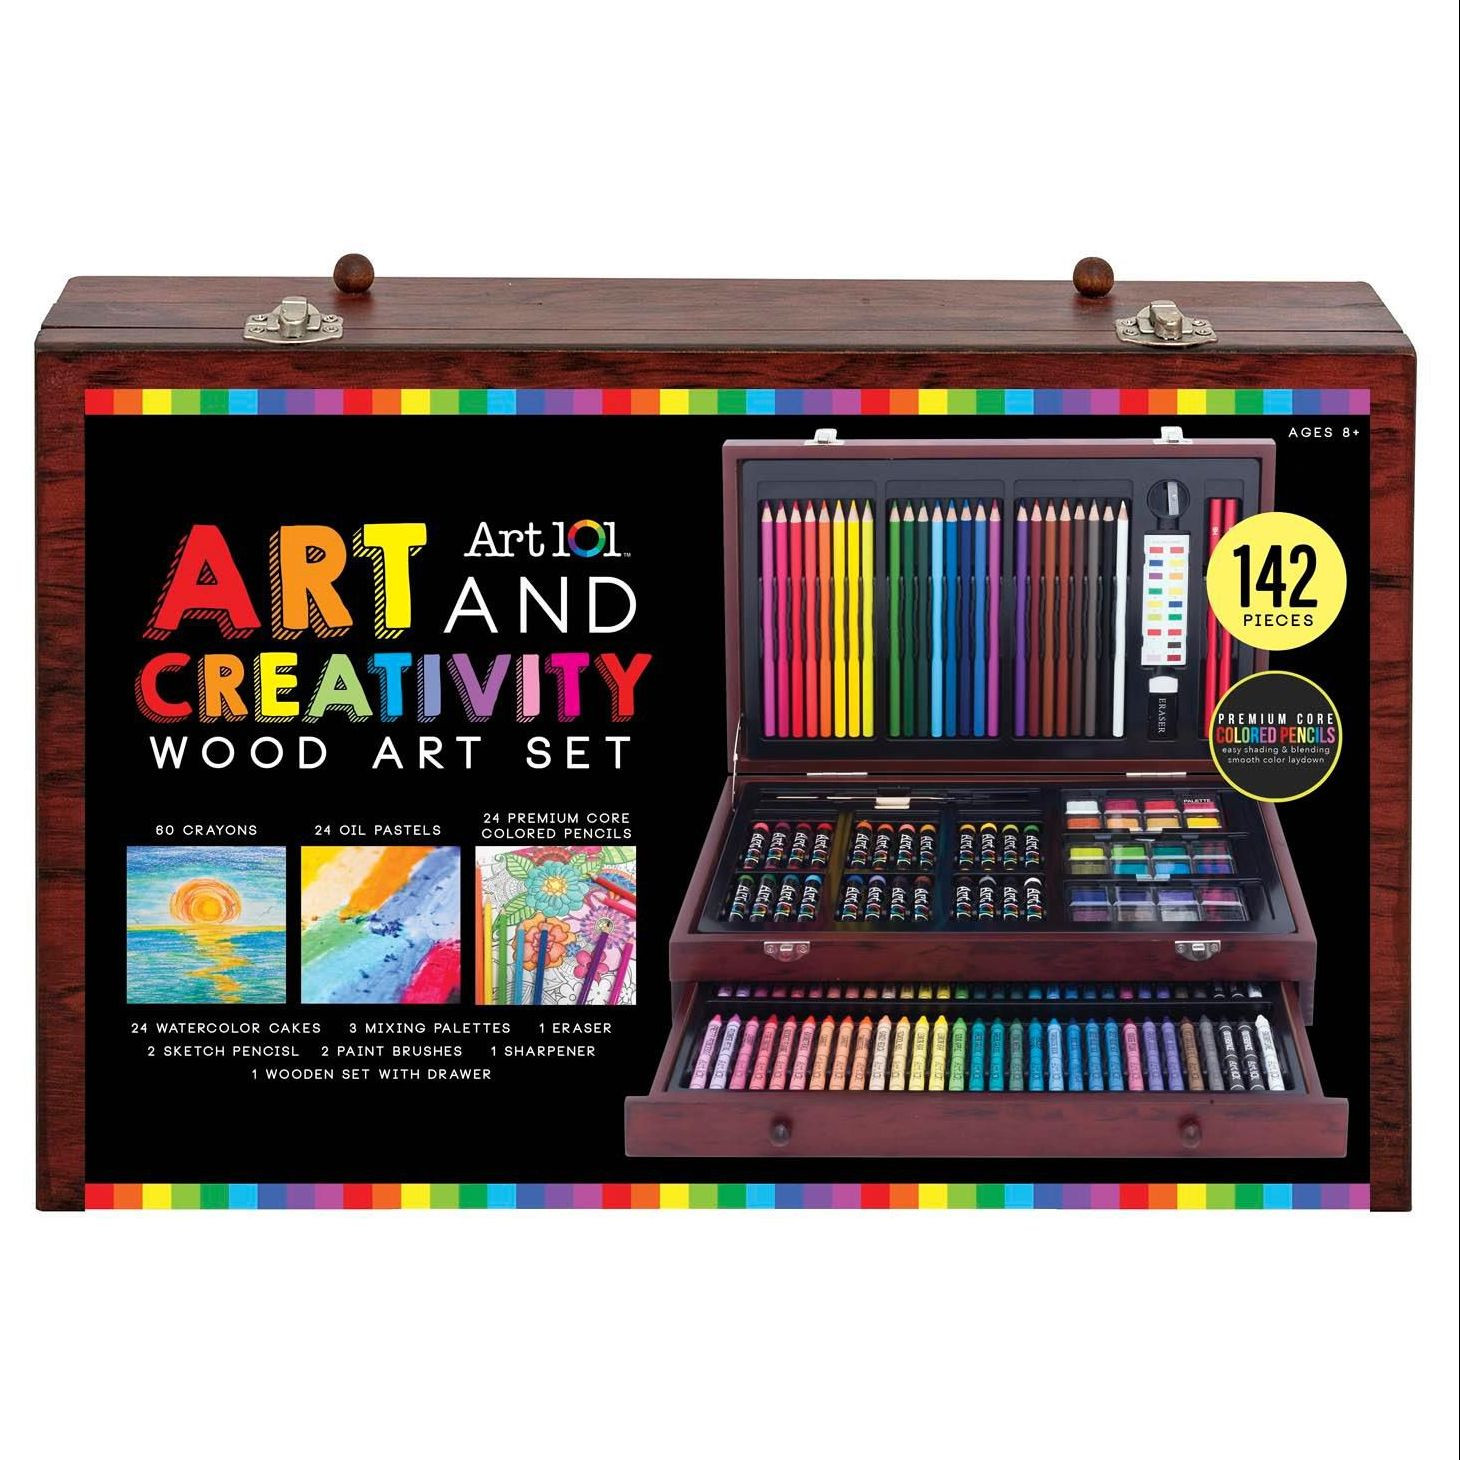 Art Kit For Toddlers
 12 Best Art & Craft Kits for Kids in 2018 Kids Arts and